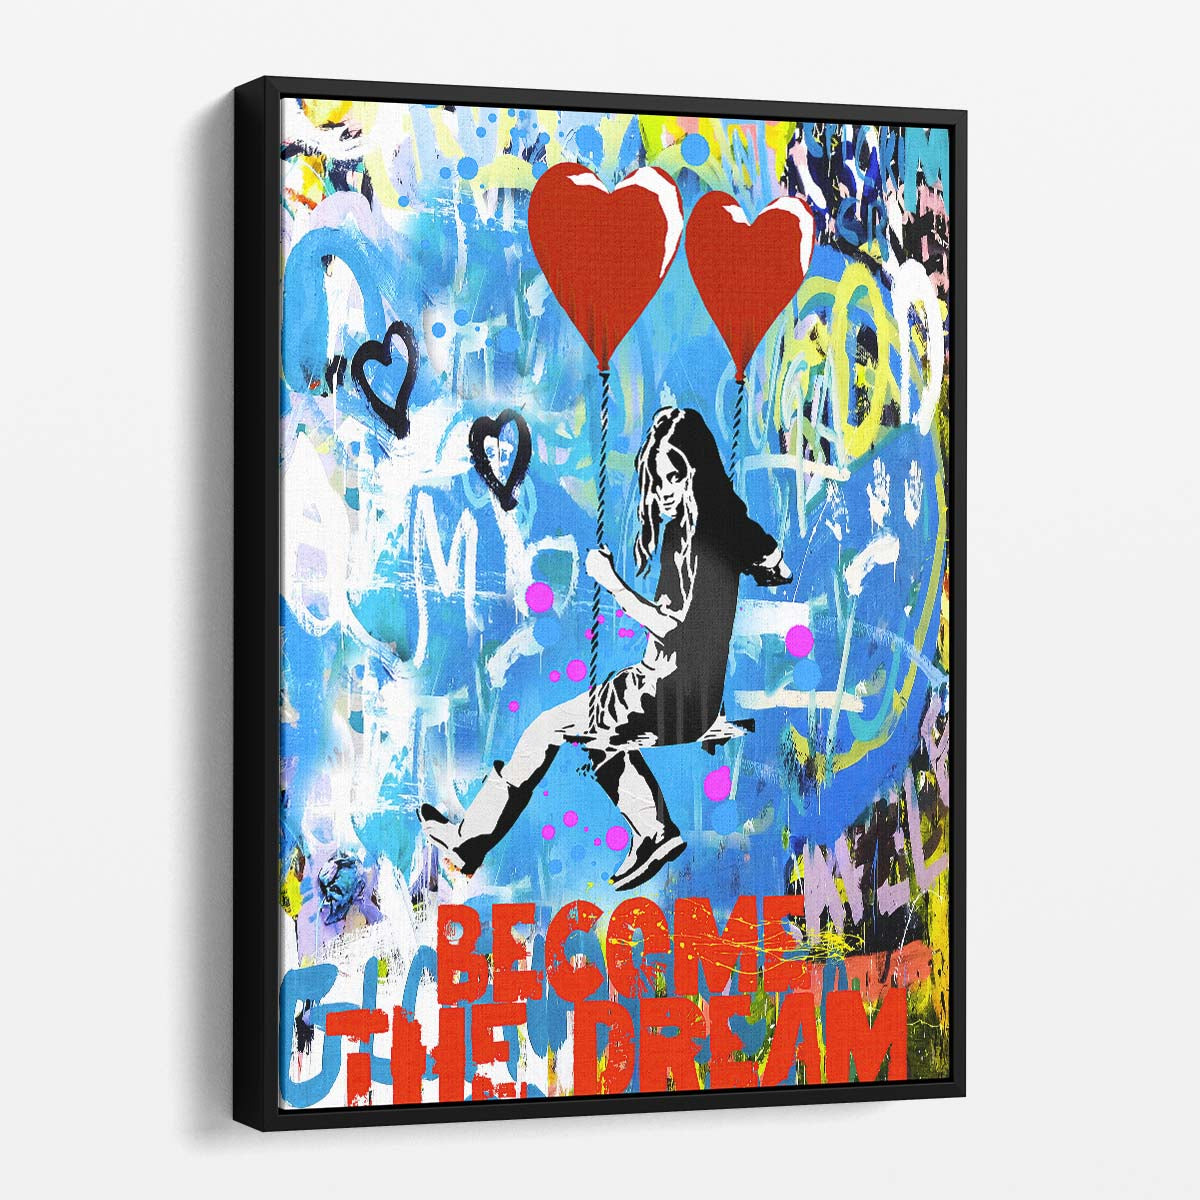 Banksy Become The Dream Graffiti Wall Art by Luxuriance Designs. Made in USA.